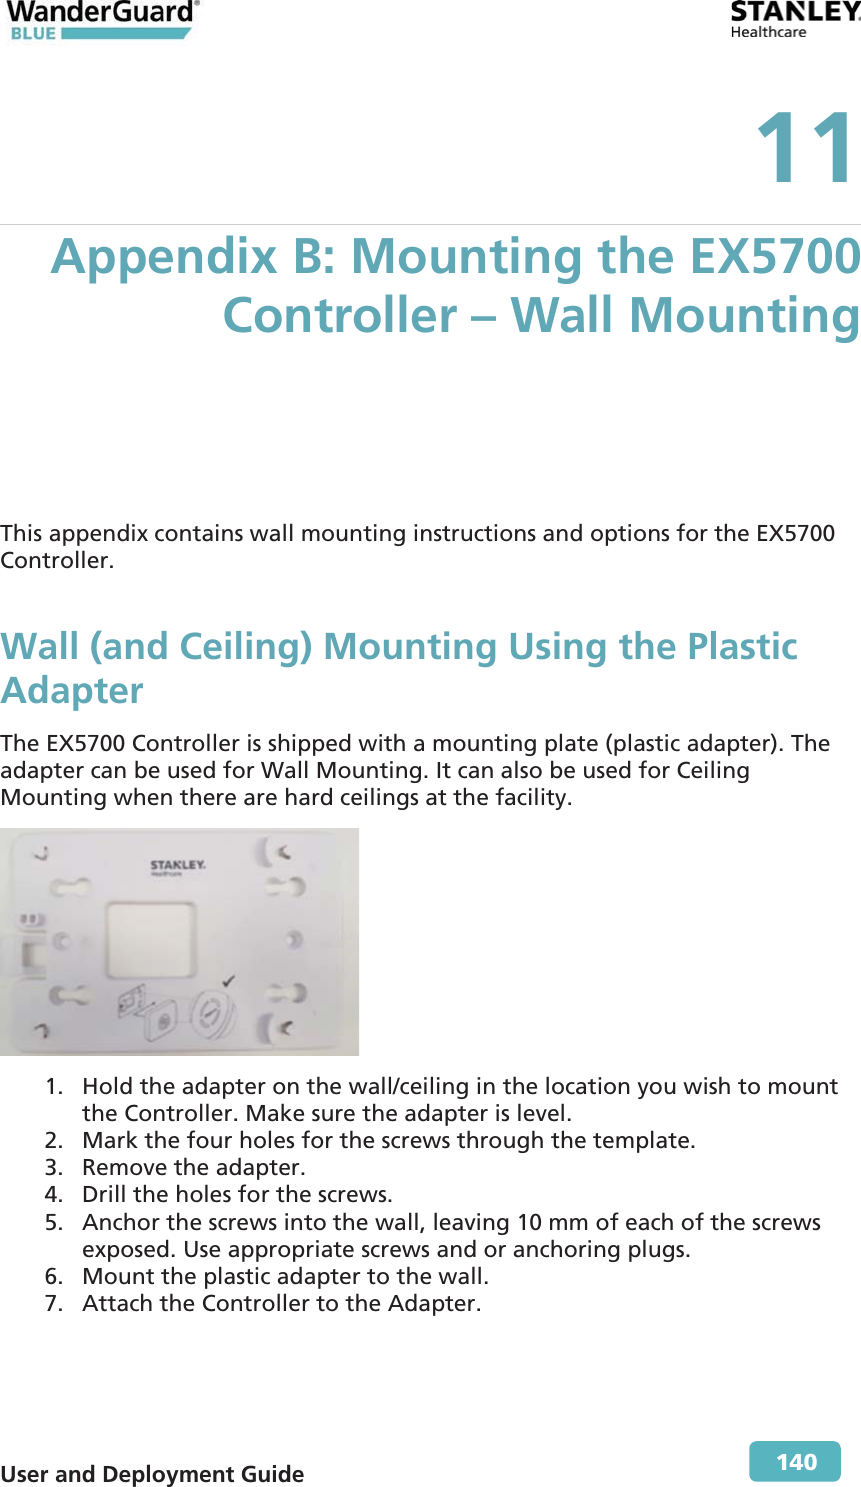  User and Deployment Guide        140 11 Appendix B: Mounting the EX5700 Controller – Wall Mounting This appendix contains wall mounting instructions and options for the EX5700 Controller. Wall (and Ceiling) Mounting Using the Plastic Adapter The EX5700 Controller is shipped with a mounting plate (plastic adapter). The adapter can be used for Wall Mounting. It can also be used for Ceiling Mounting when there are hard ceilings at the facility.  1. Hold the adapter on the wall/ceiling in the location you wish to mount the Controller. Make sure the adapter is level. 2. Mark the four holes for the screws through the template. 3. Remove the adapter. 4. Drill the holes for the screws.  5. Anchor the screws into the wall, leaving 10 mm of each of the screws exposed. Use appropriate screws and or anchoring plugs. 6. Mount the plastic adapter to the wall. 7. Attach the Controller to the Adapter. 